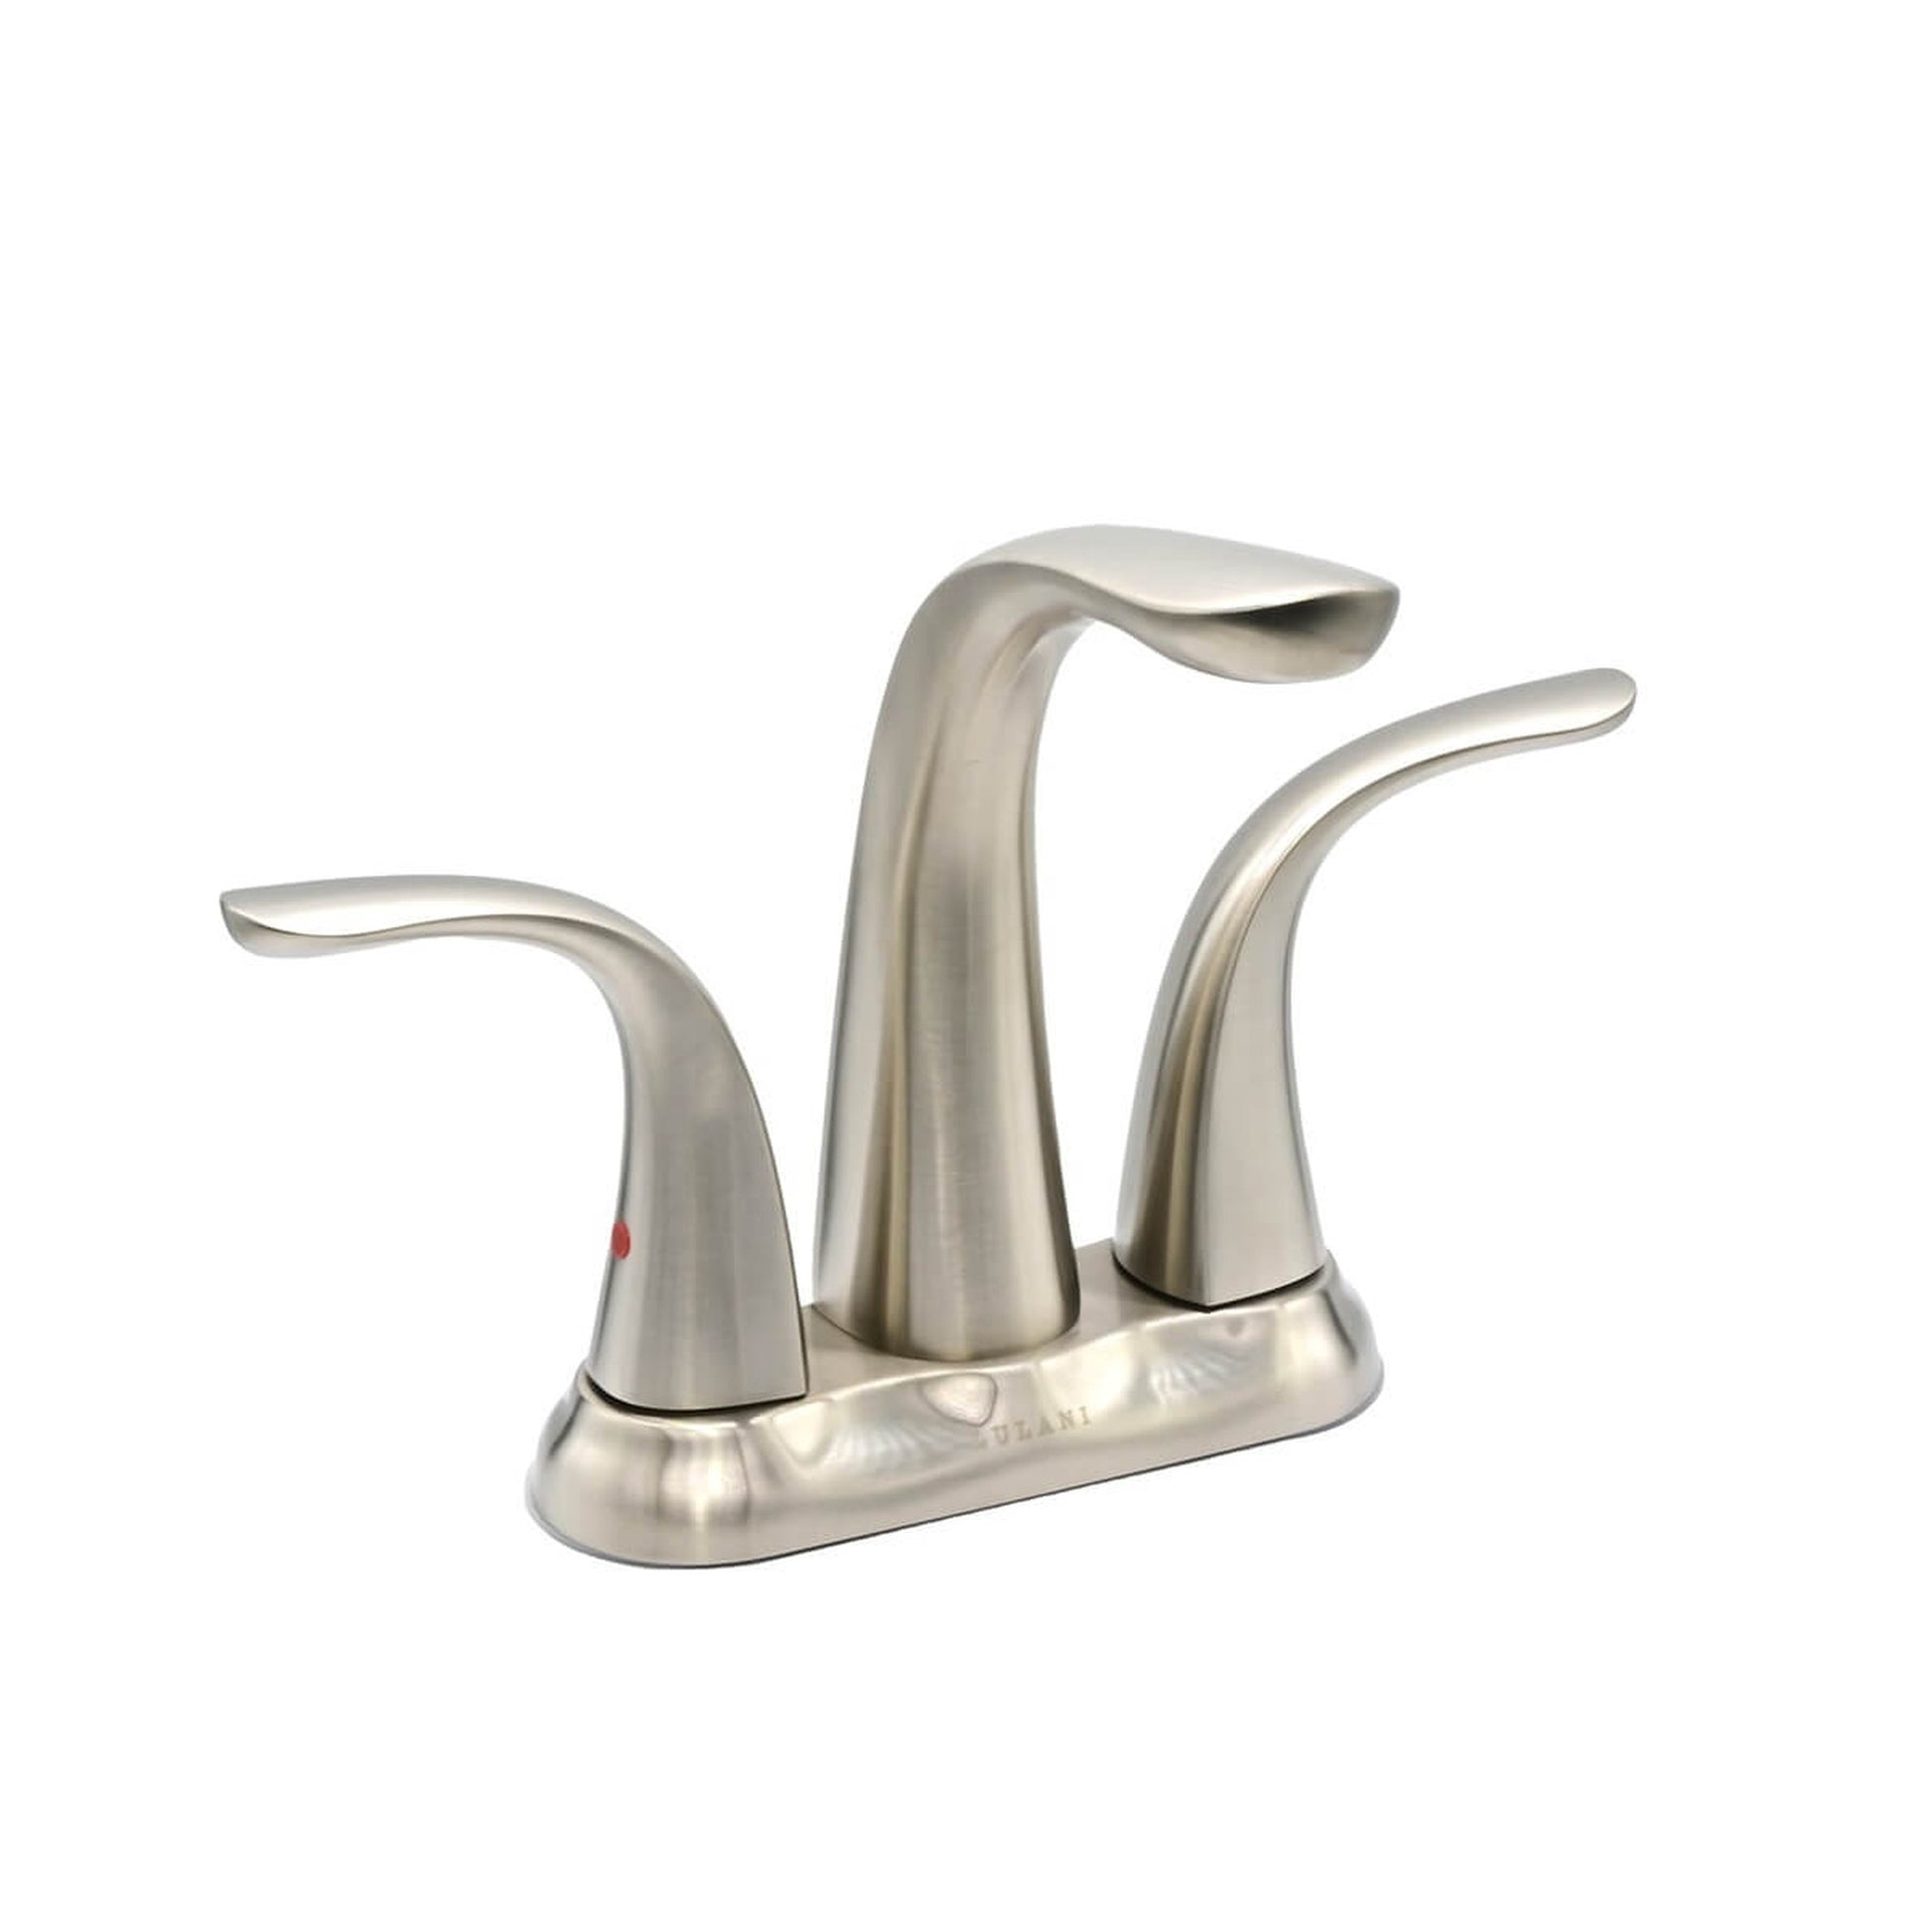 Lulani Kauai Brushed Nickel 4" Centerset Two Handle Faucet With Drain Assembly